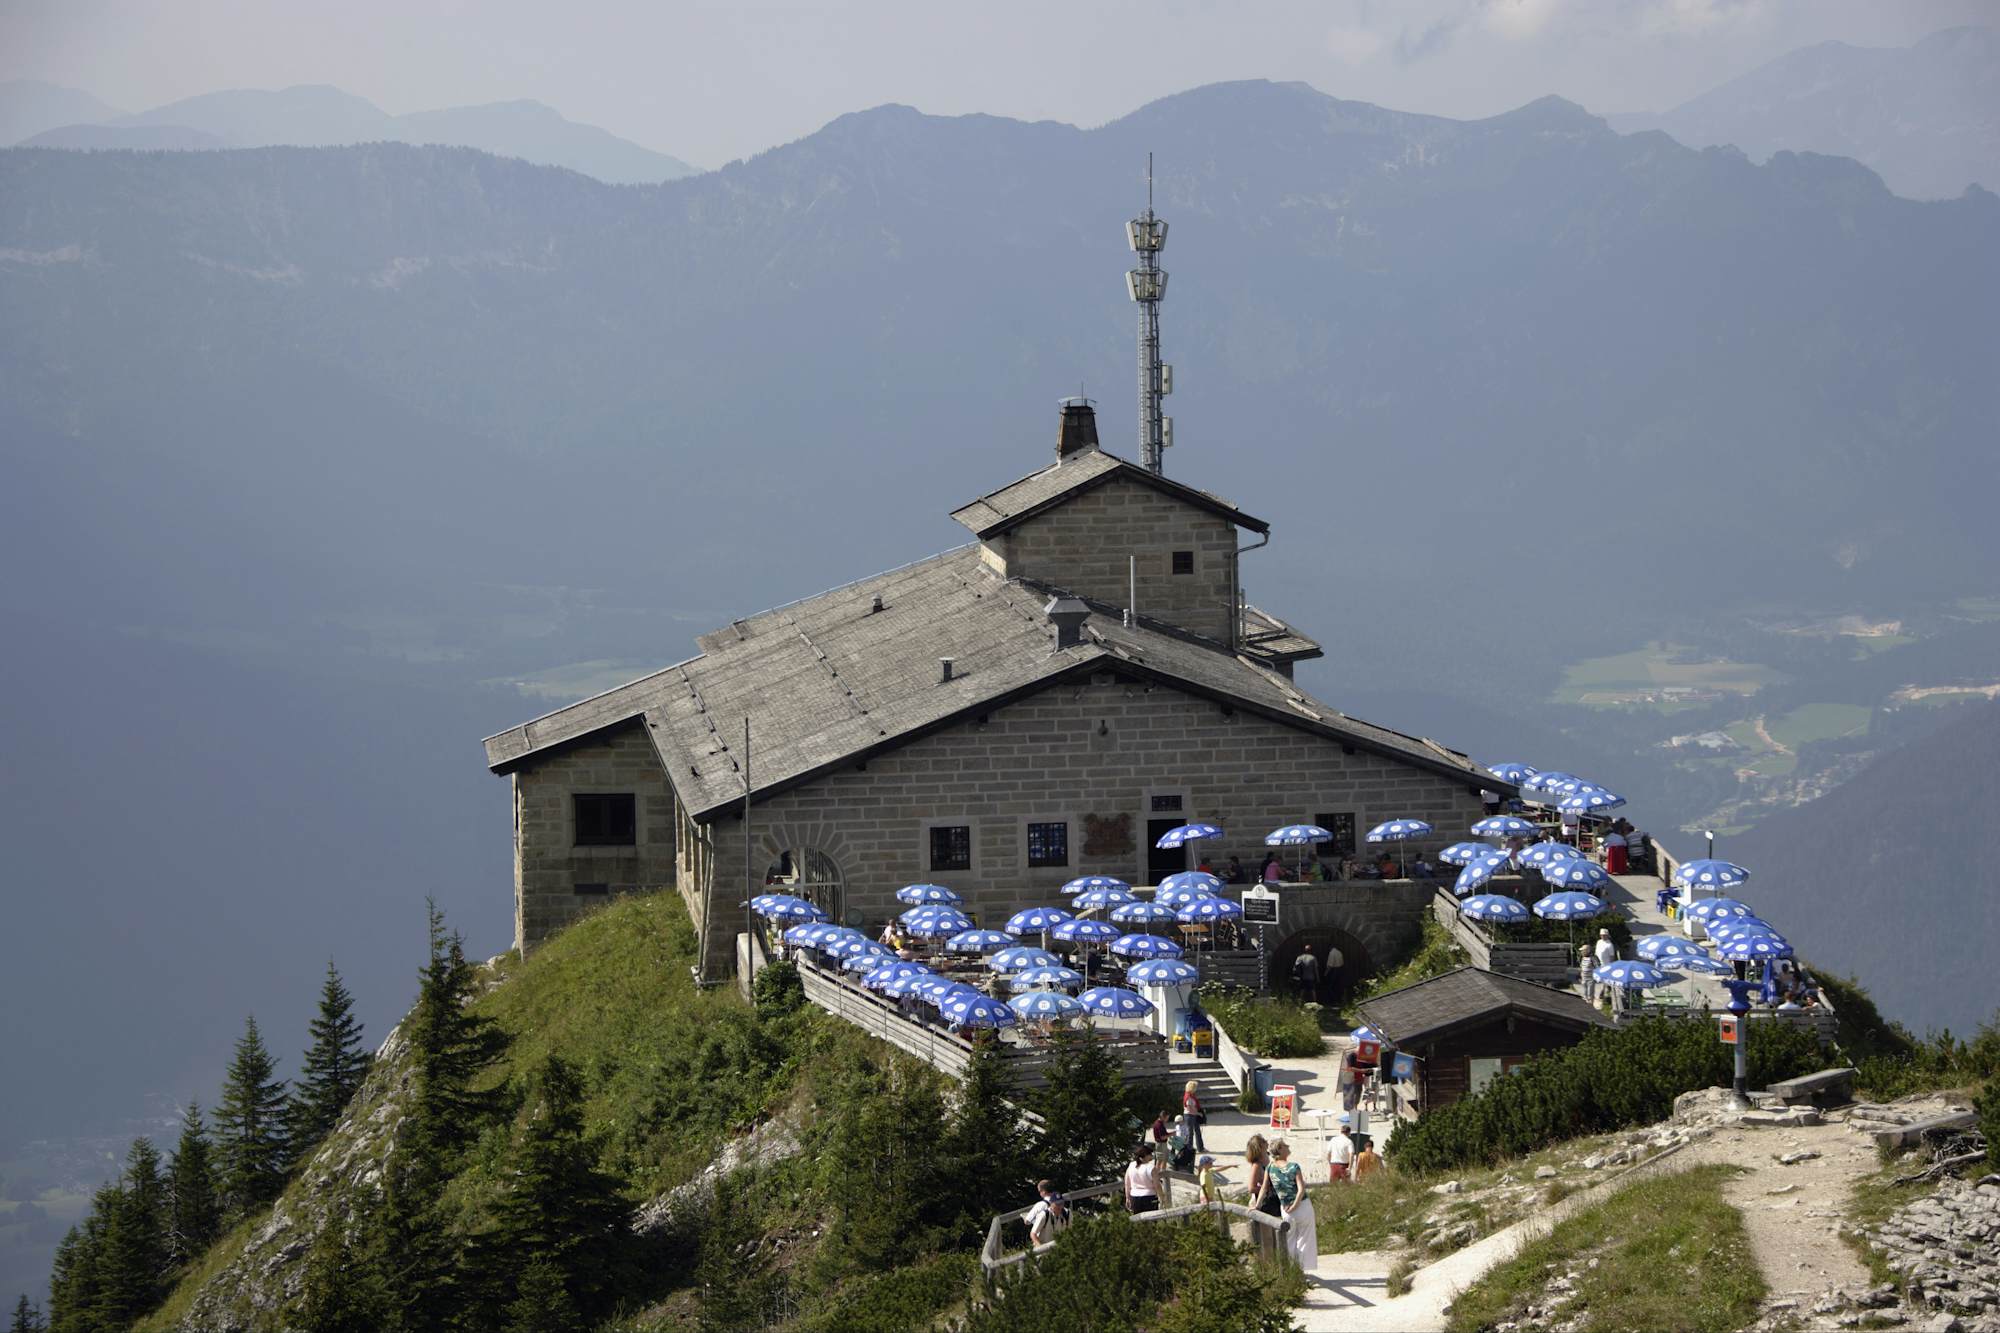 Eagle's Nest Berchtesgaden, Germany Attractions Lonely